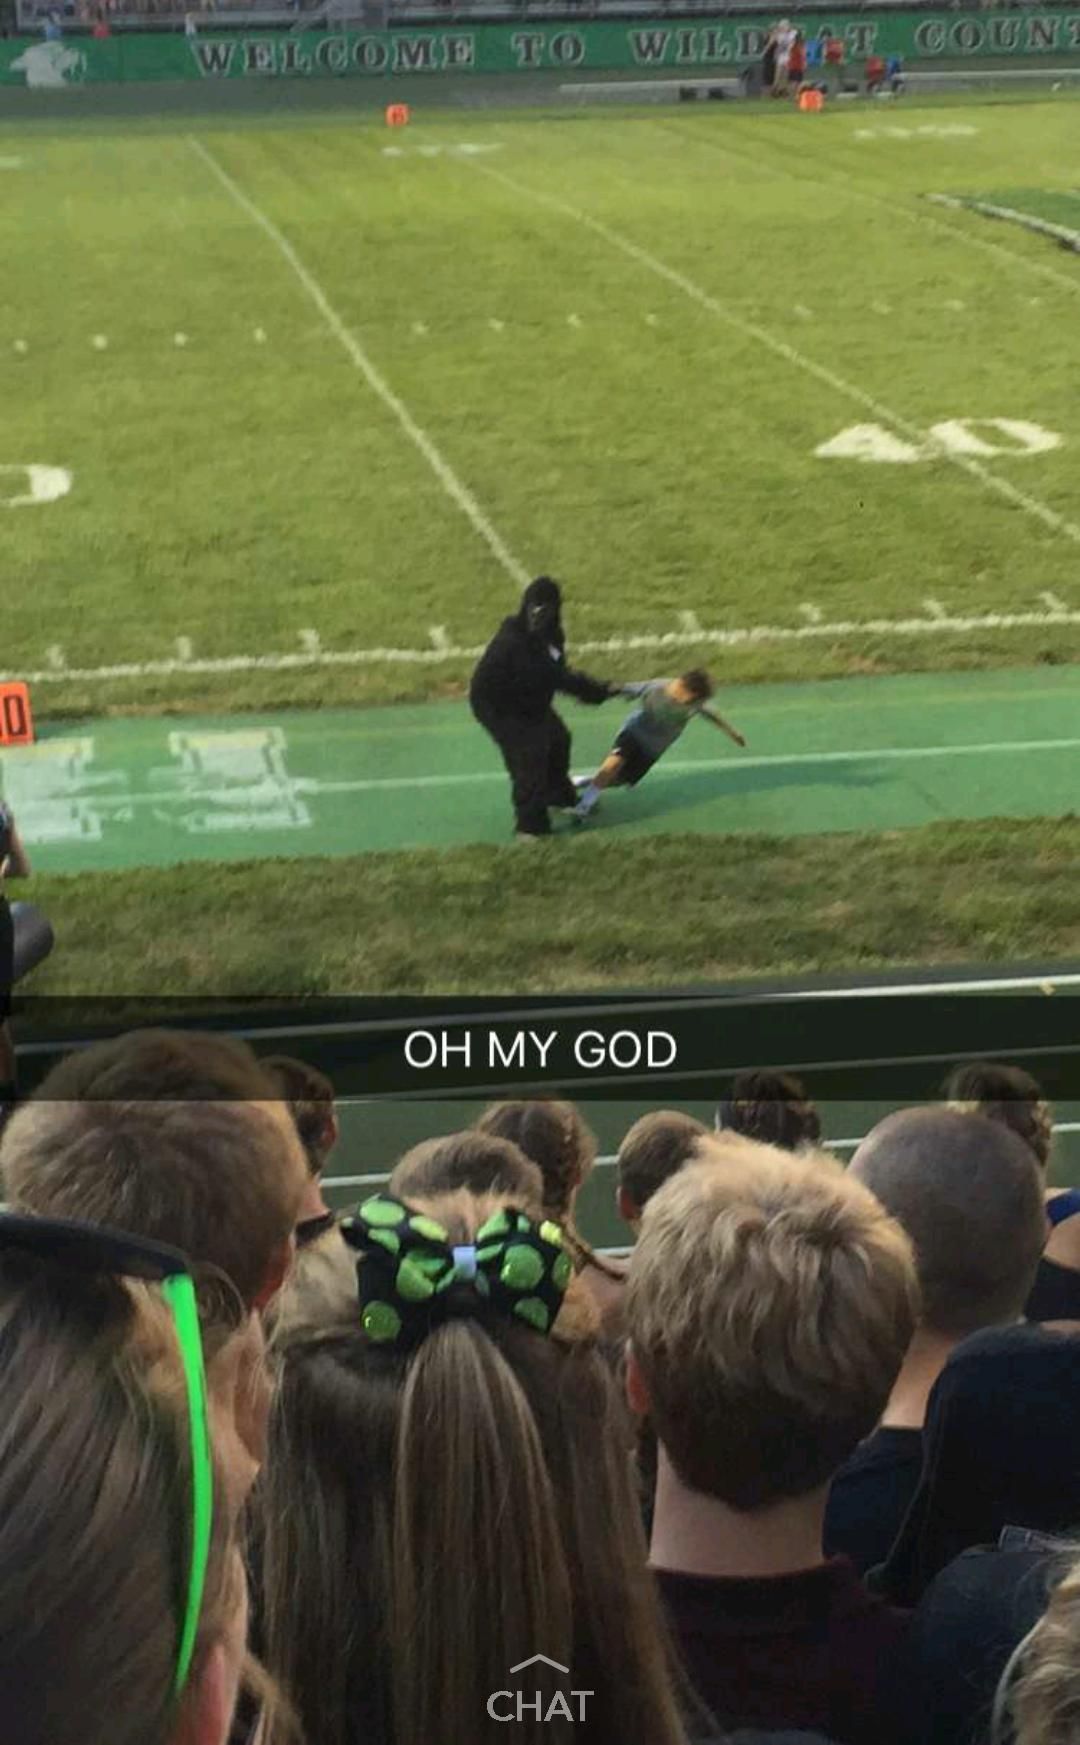 I live in Cincinnati. At my local high school football game a kid showed up in a gorilla suit and started dragging kids around.